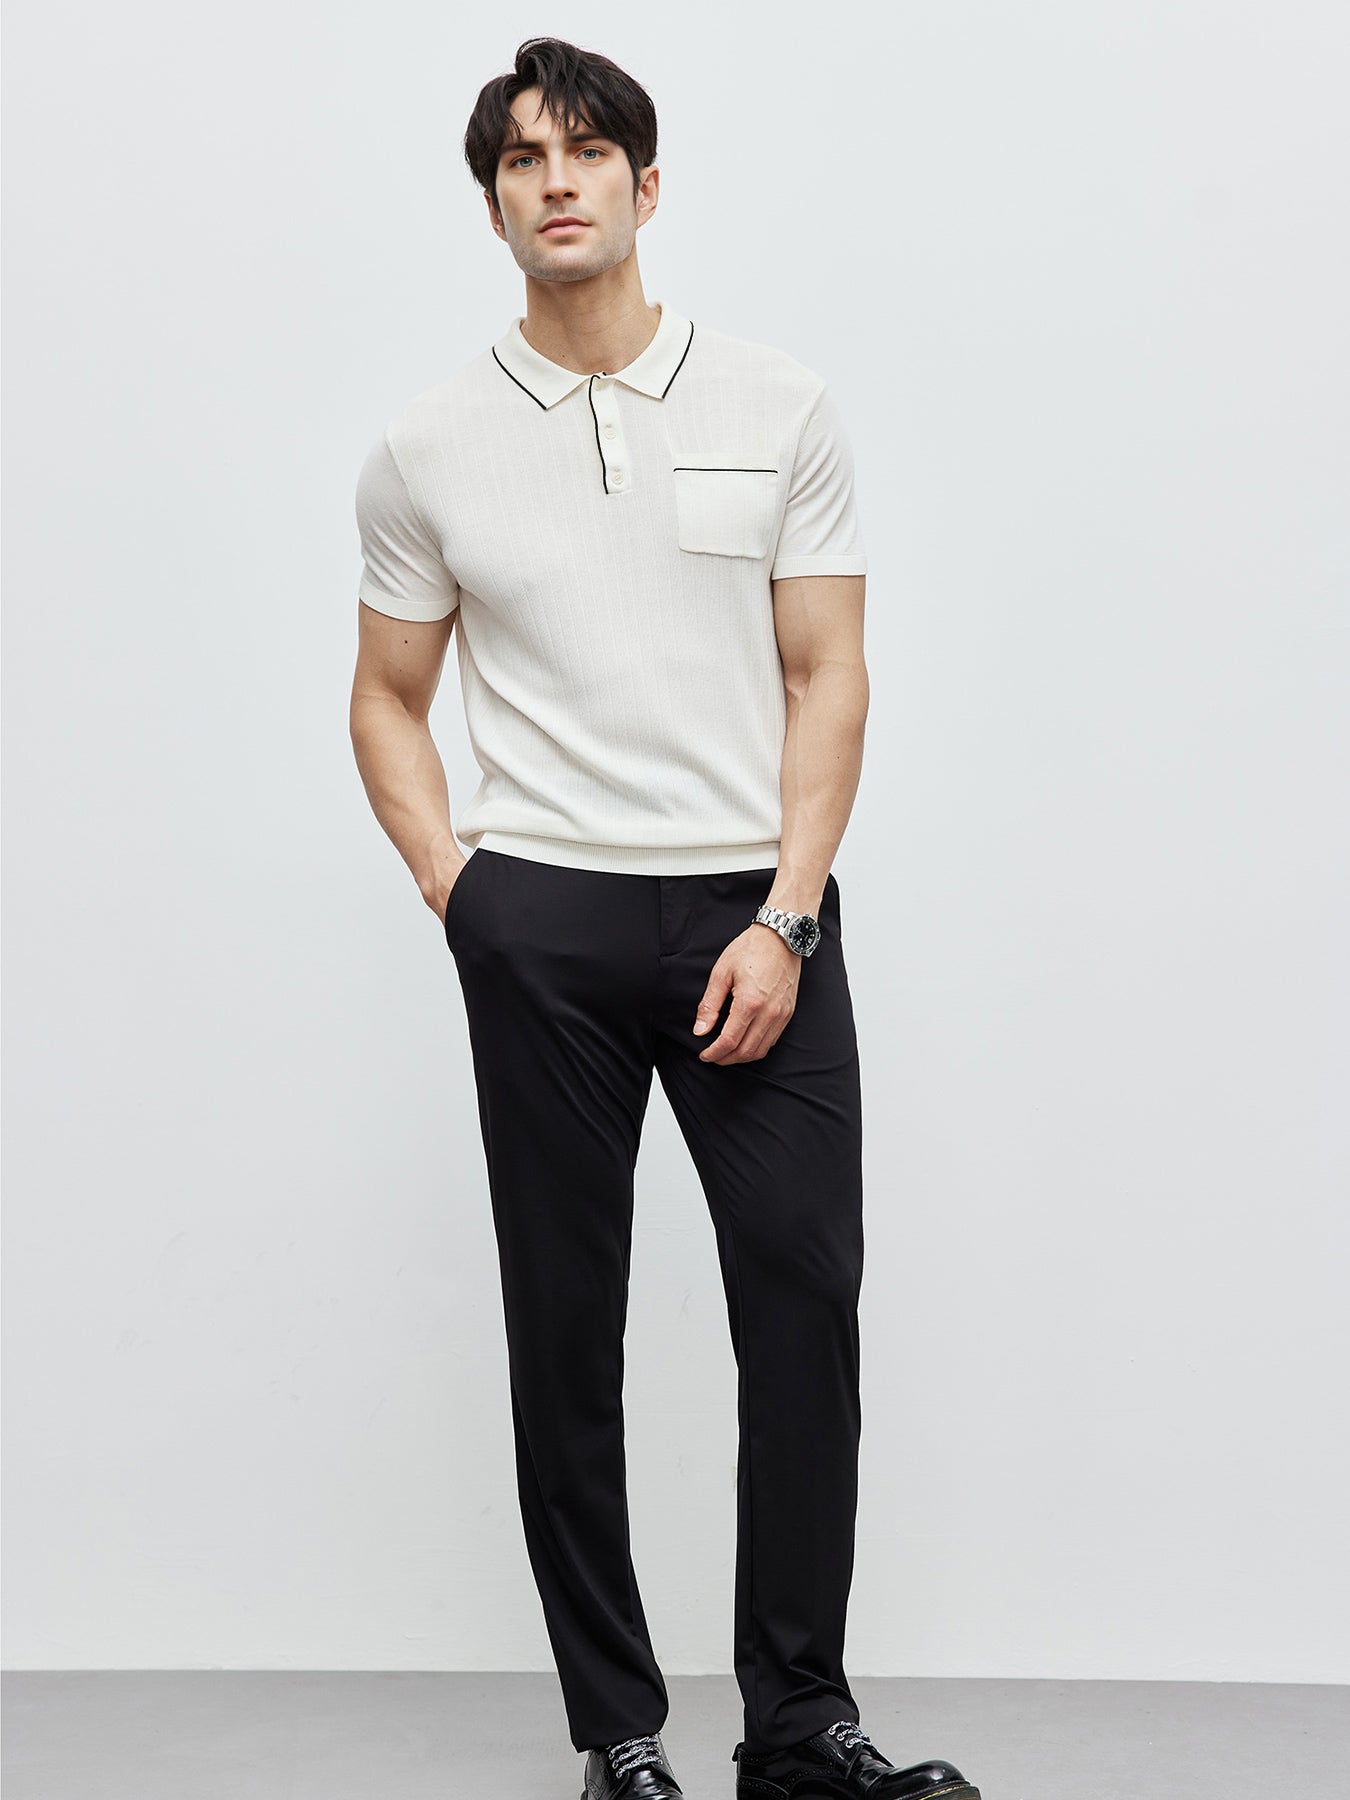 GentleKnit Contrast Color Short Sleeve Knitted Polo